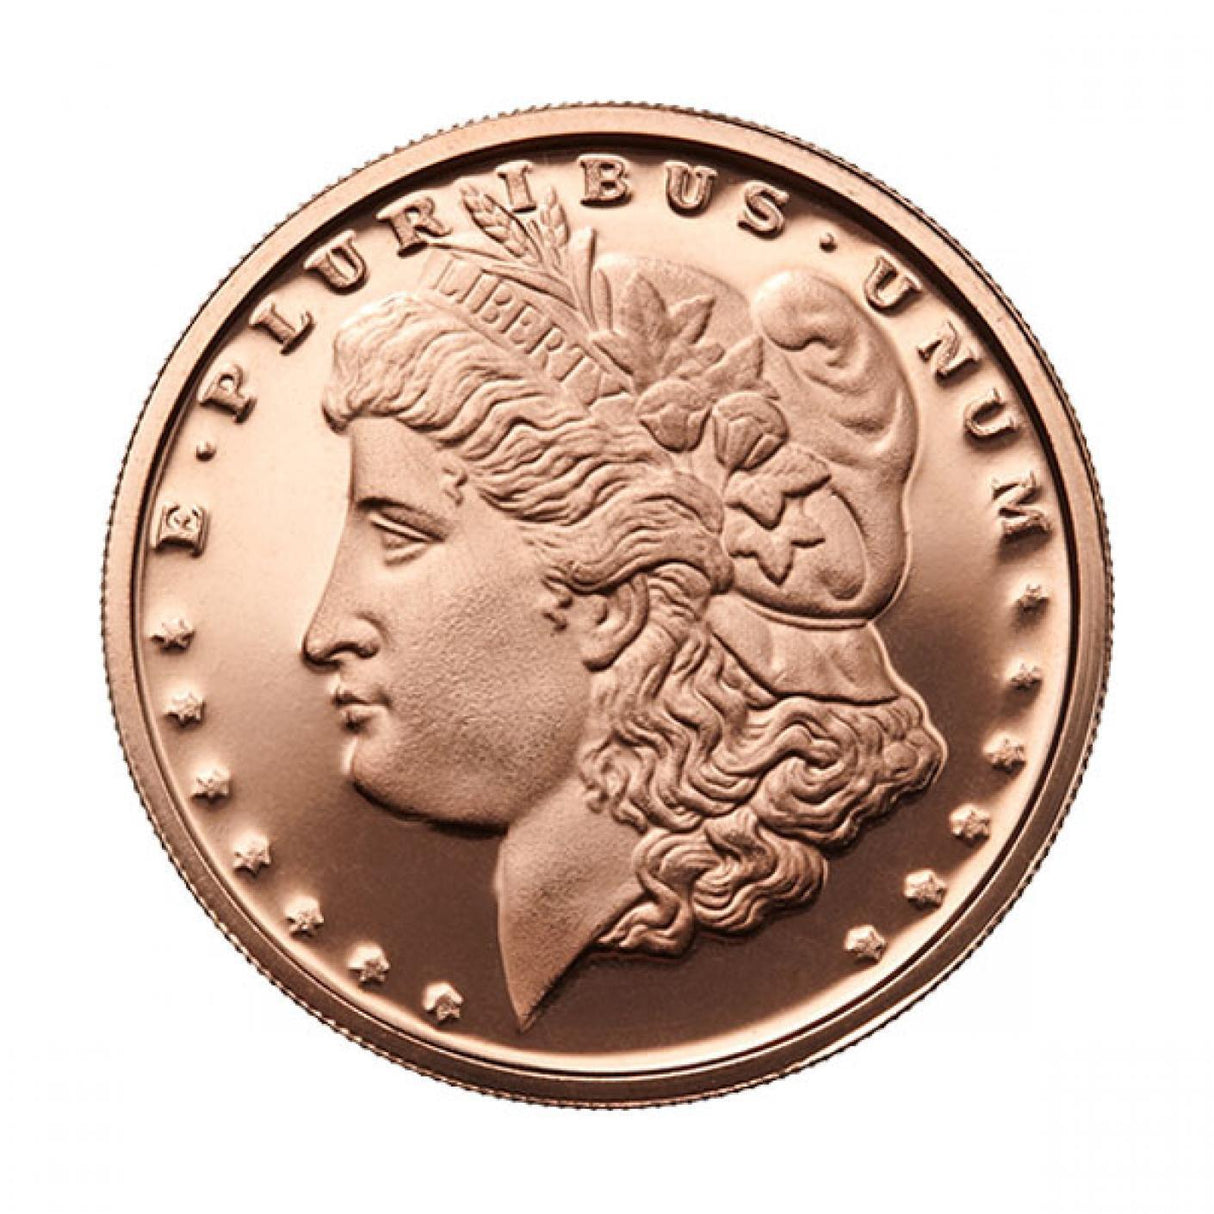 1 Ounce Copper Round (Our Choice)